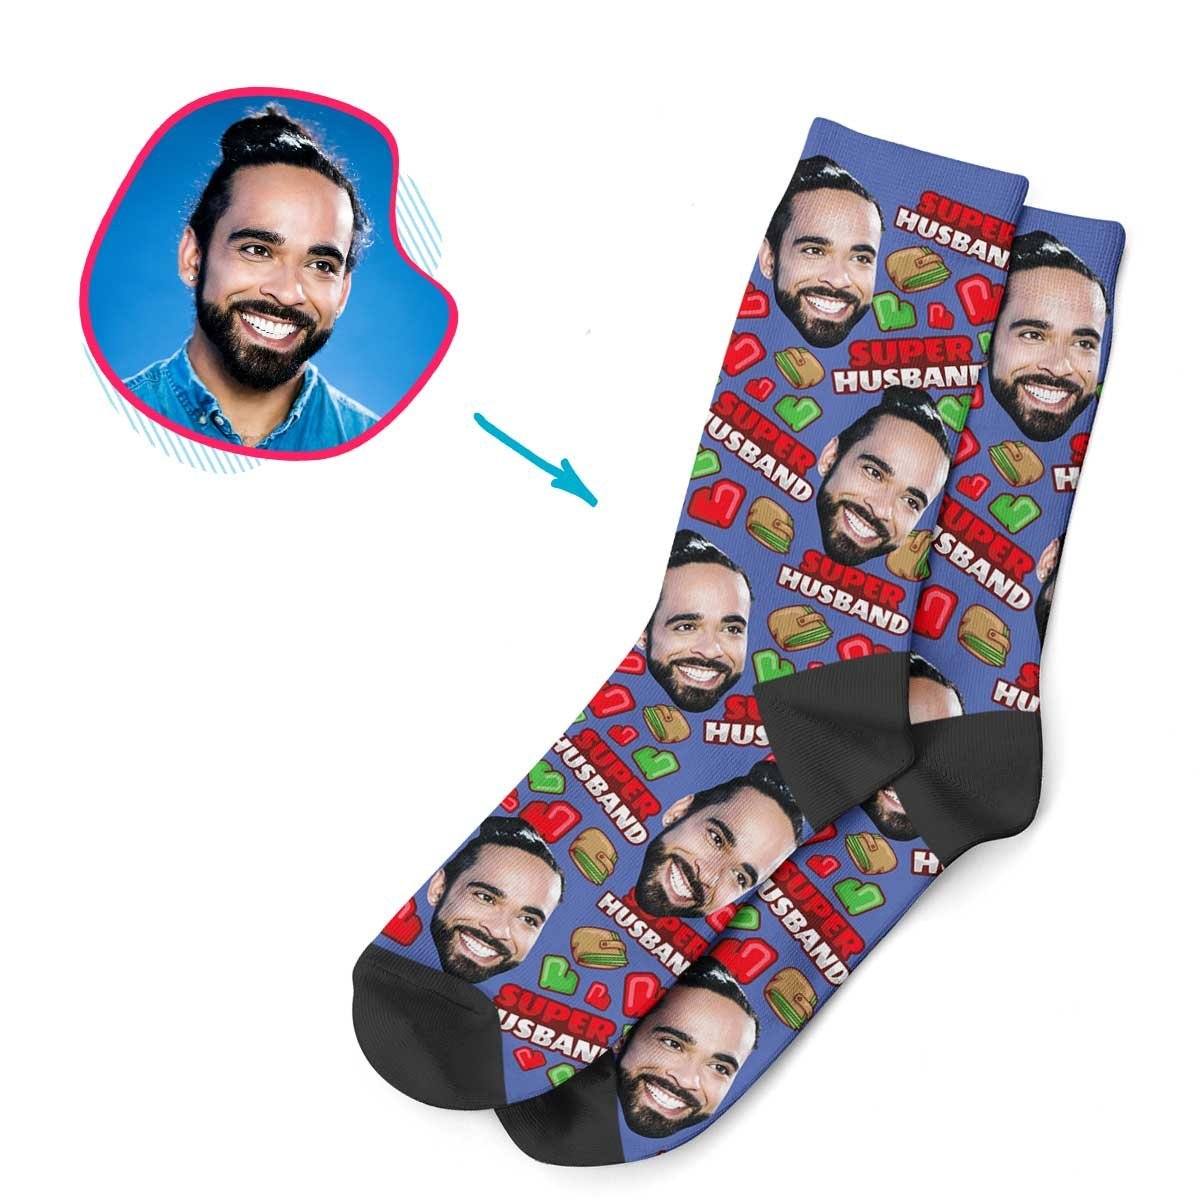 Darkblue Husband personalized socks with photo of face printed on them